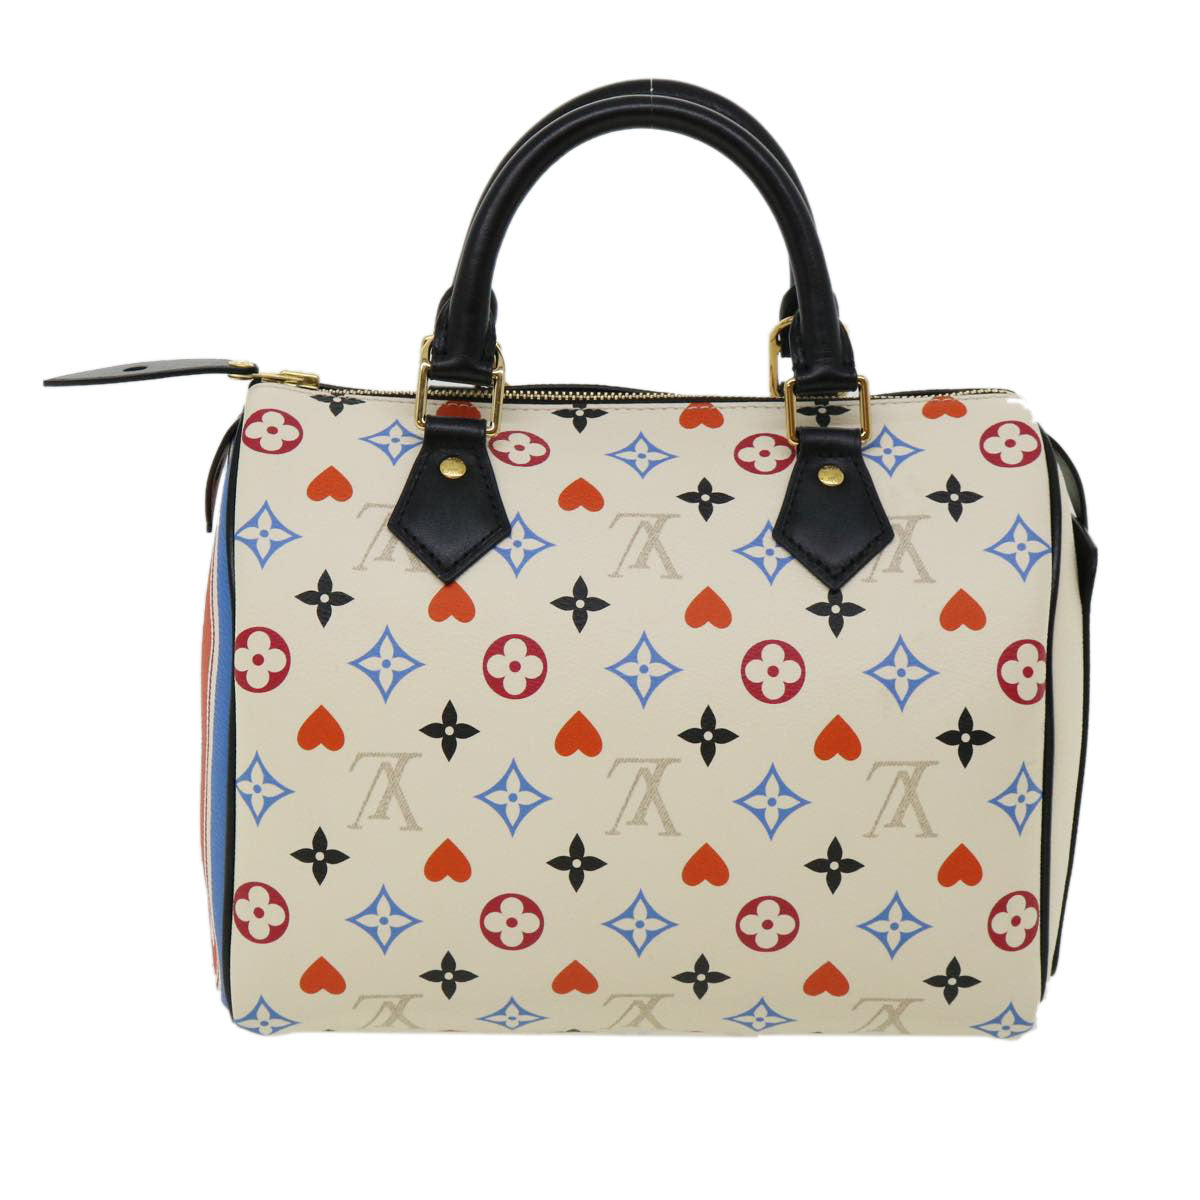 LOUIS VUITTON Monogram game on Speedy Bandouliere 25 Hand Bag 2way Auth bs2097A - 0